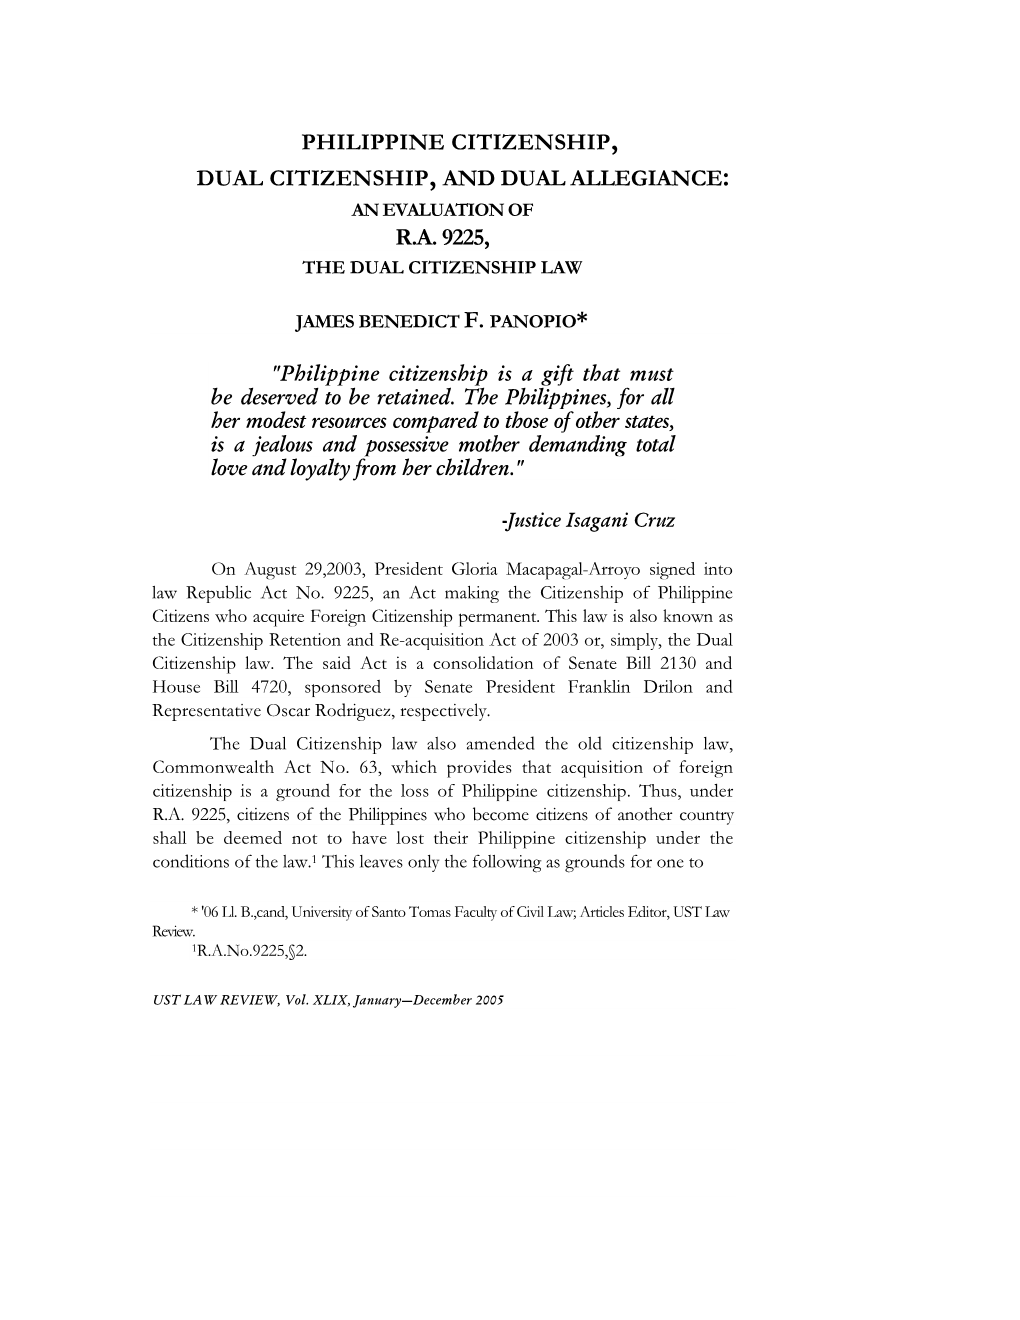 PHILIPPINE CITIZENSHIP, DUAL CITIZENSHIP, and DUAL ALLEGIANCE 47 Every Question Surrounding Dual Citizenship, Dual Allegiance, and the Dual Citizenship Law